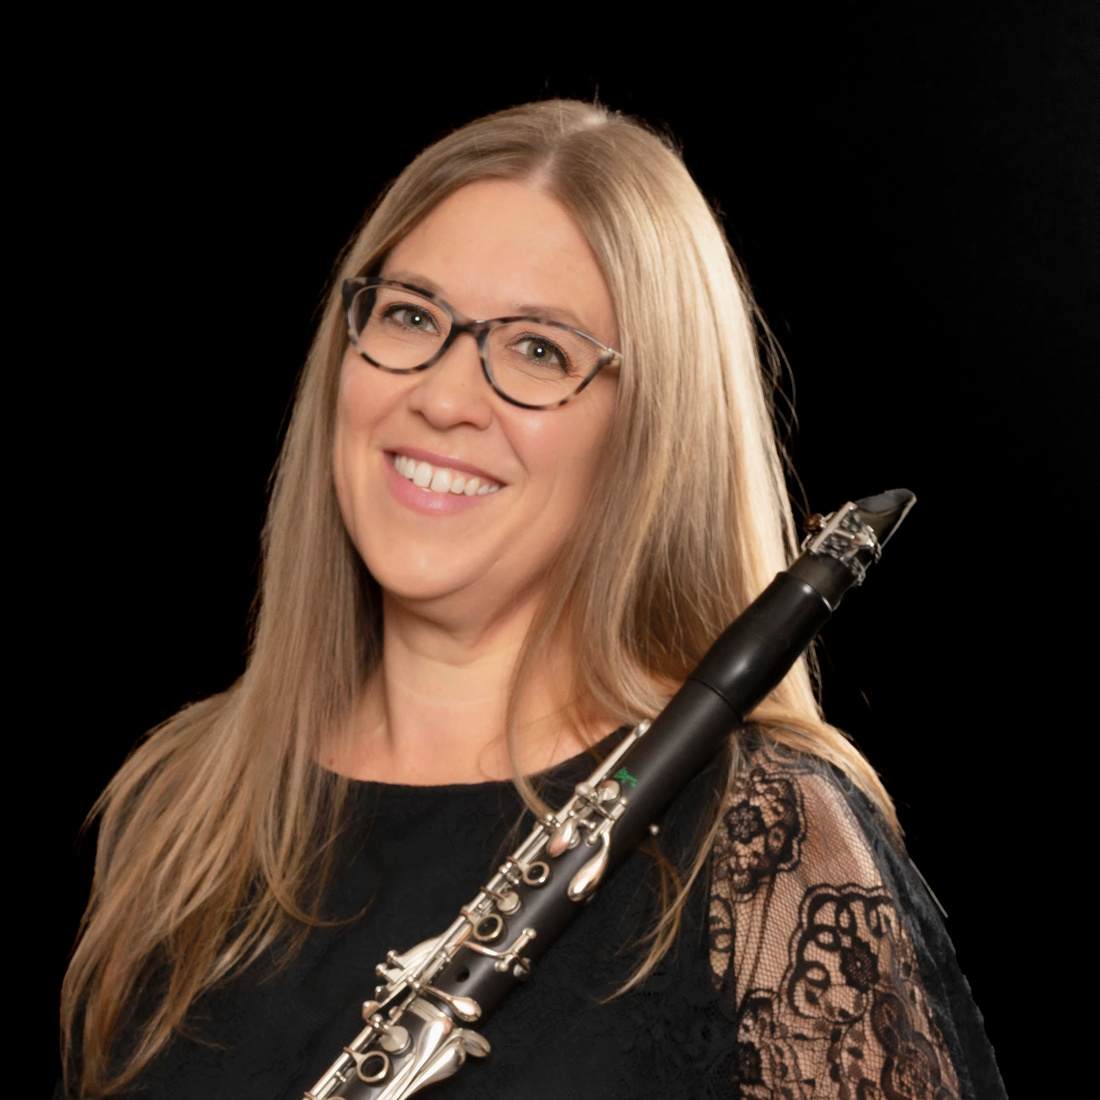 Kristin Fray, featured soloist, Mozart's Clarinet Concerto in A Major
